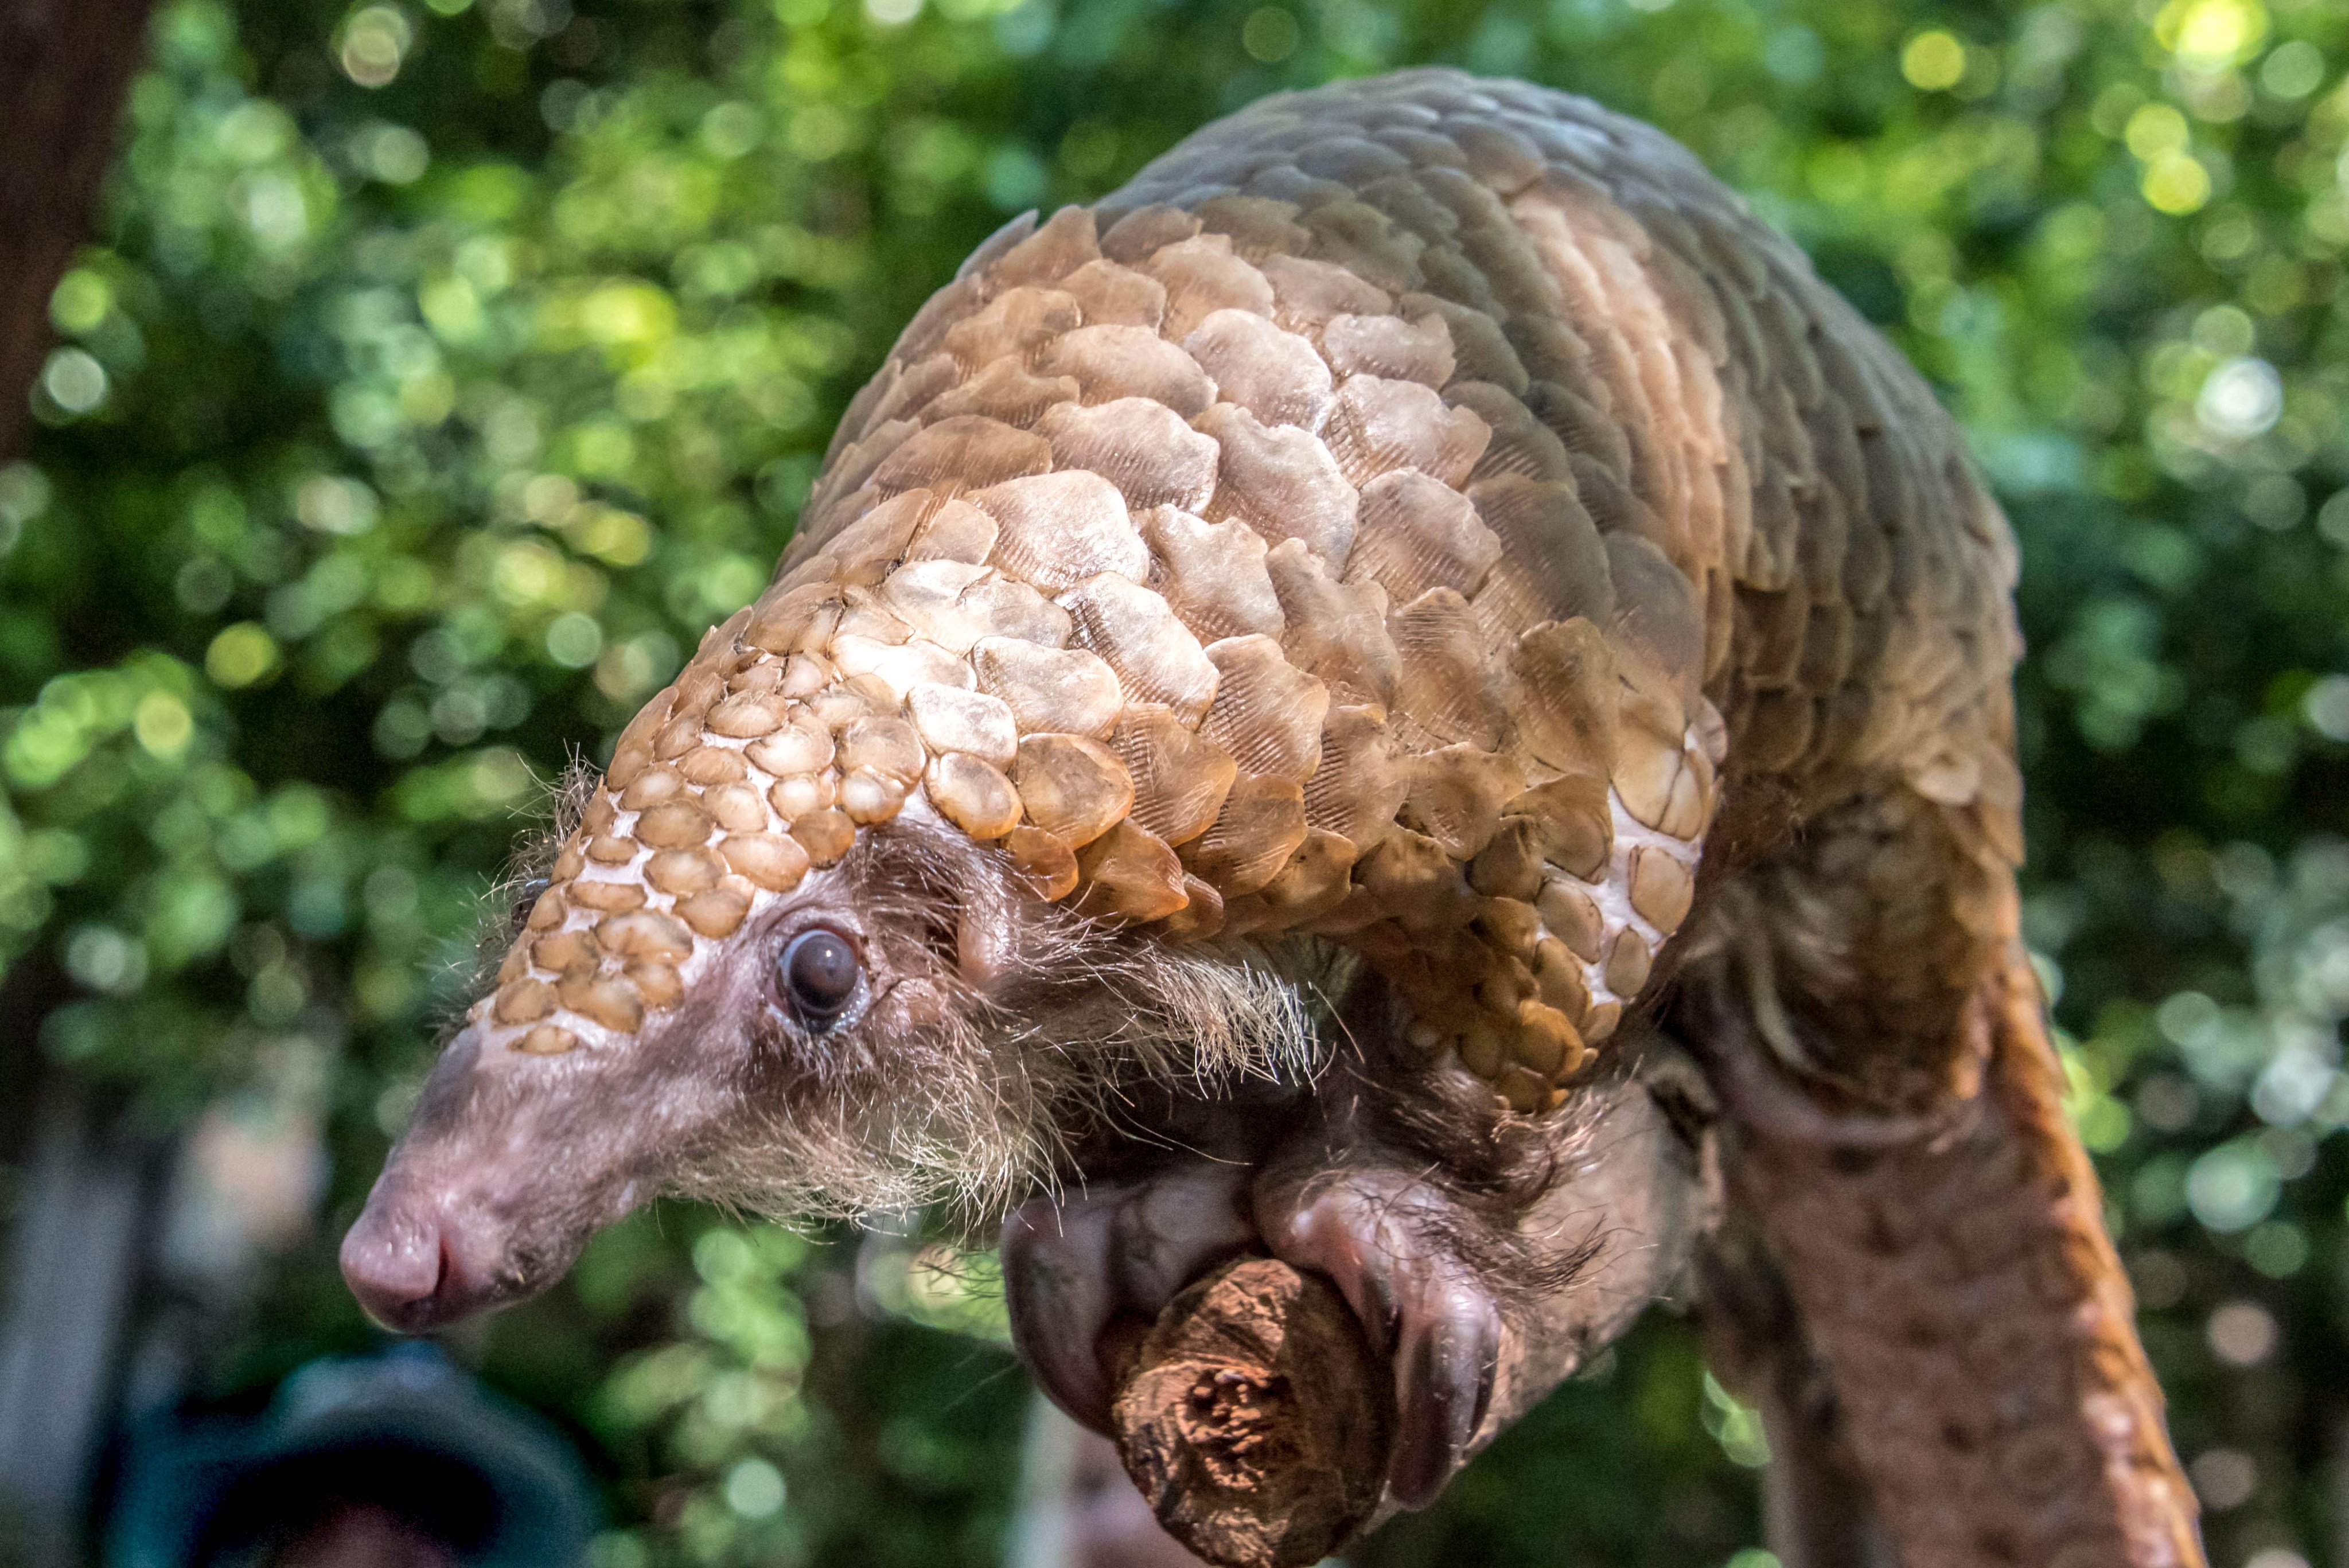 A man faces at least four years in jail after he was convicted of smuggling scales from endangered pangolins into Hong Kong. Photo: Handout